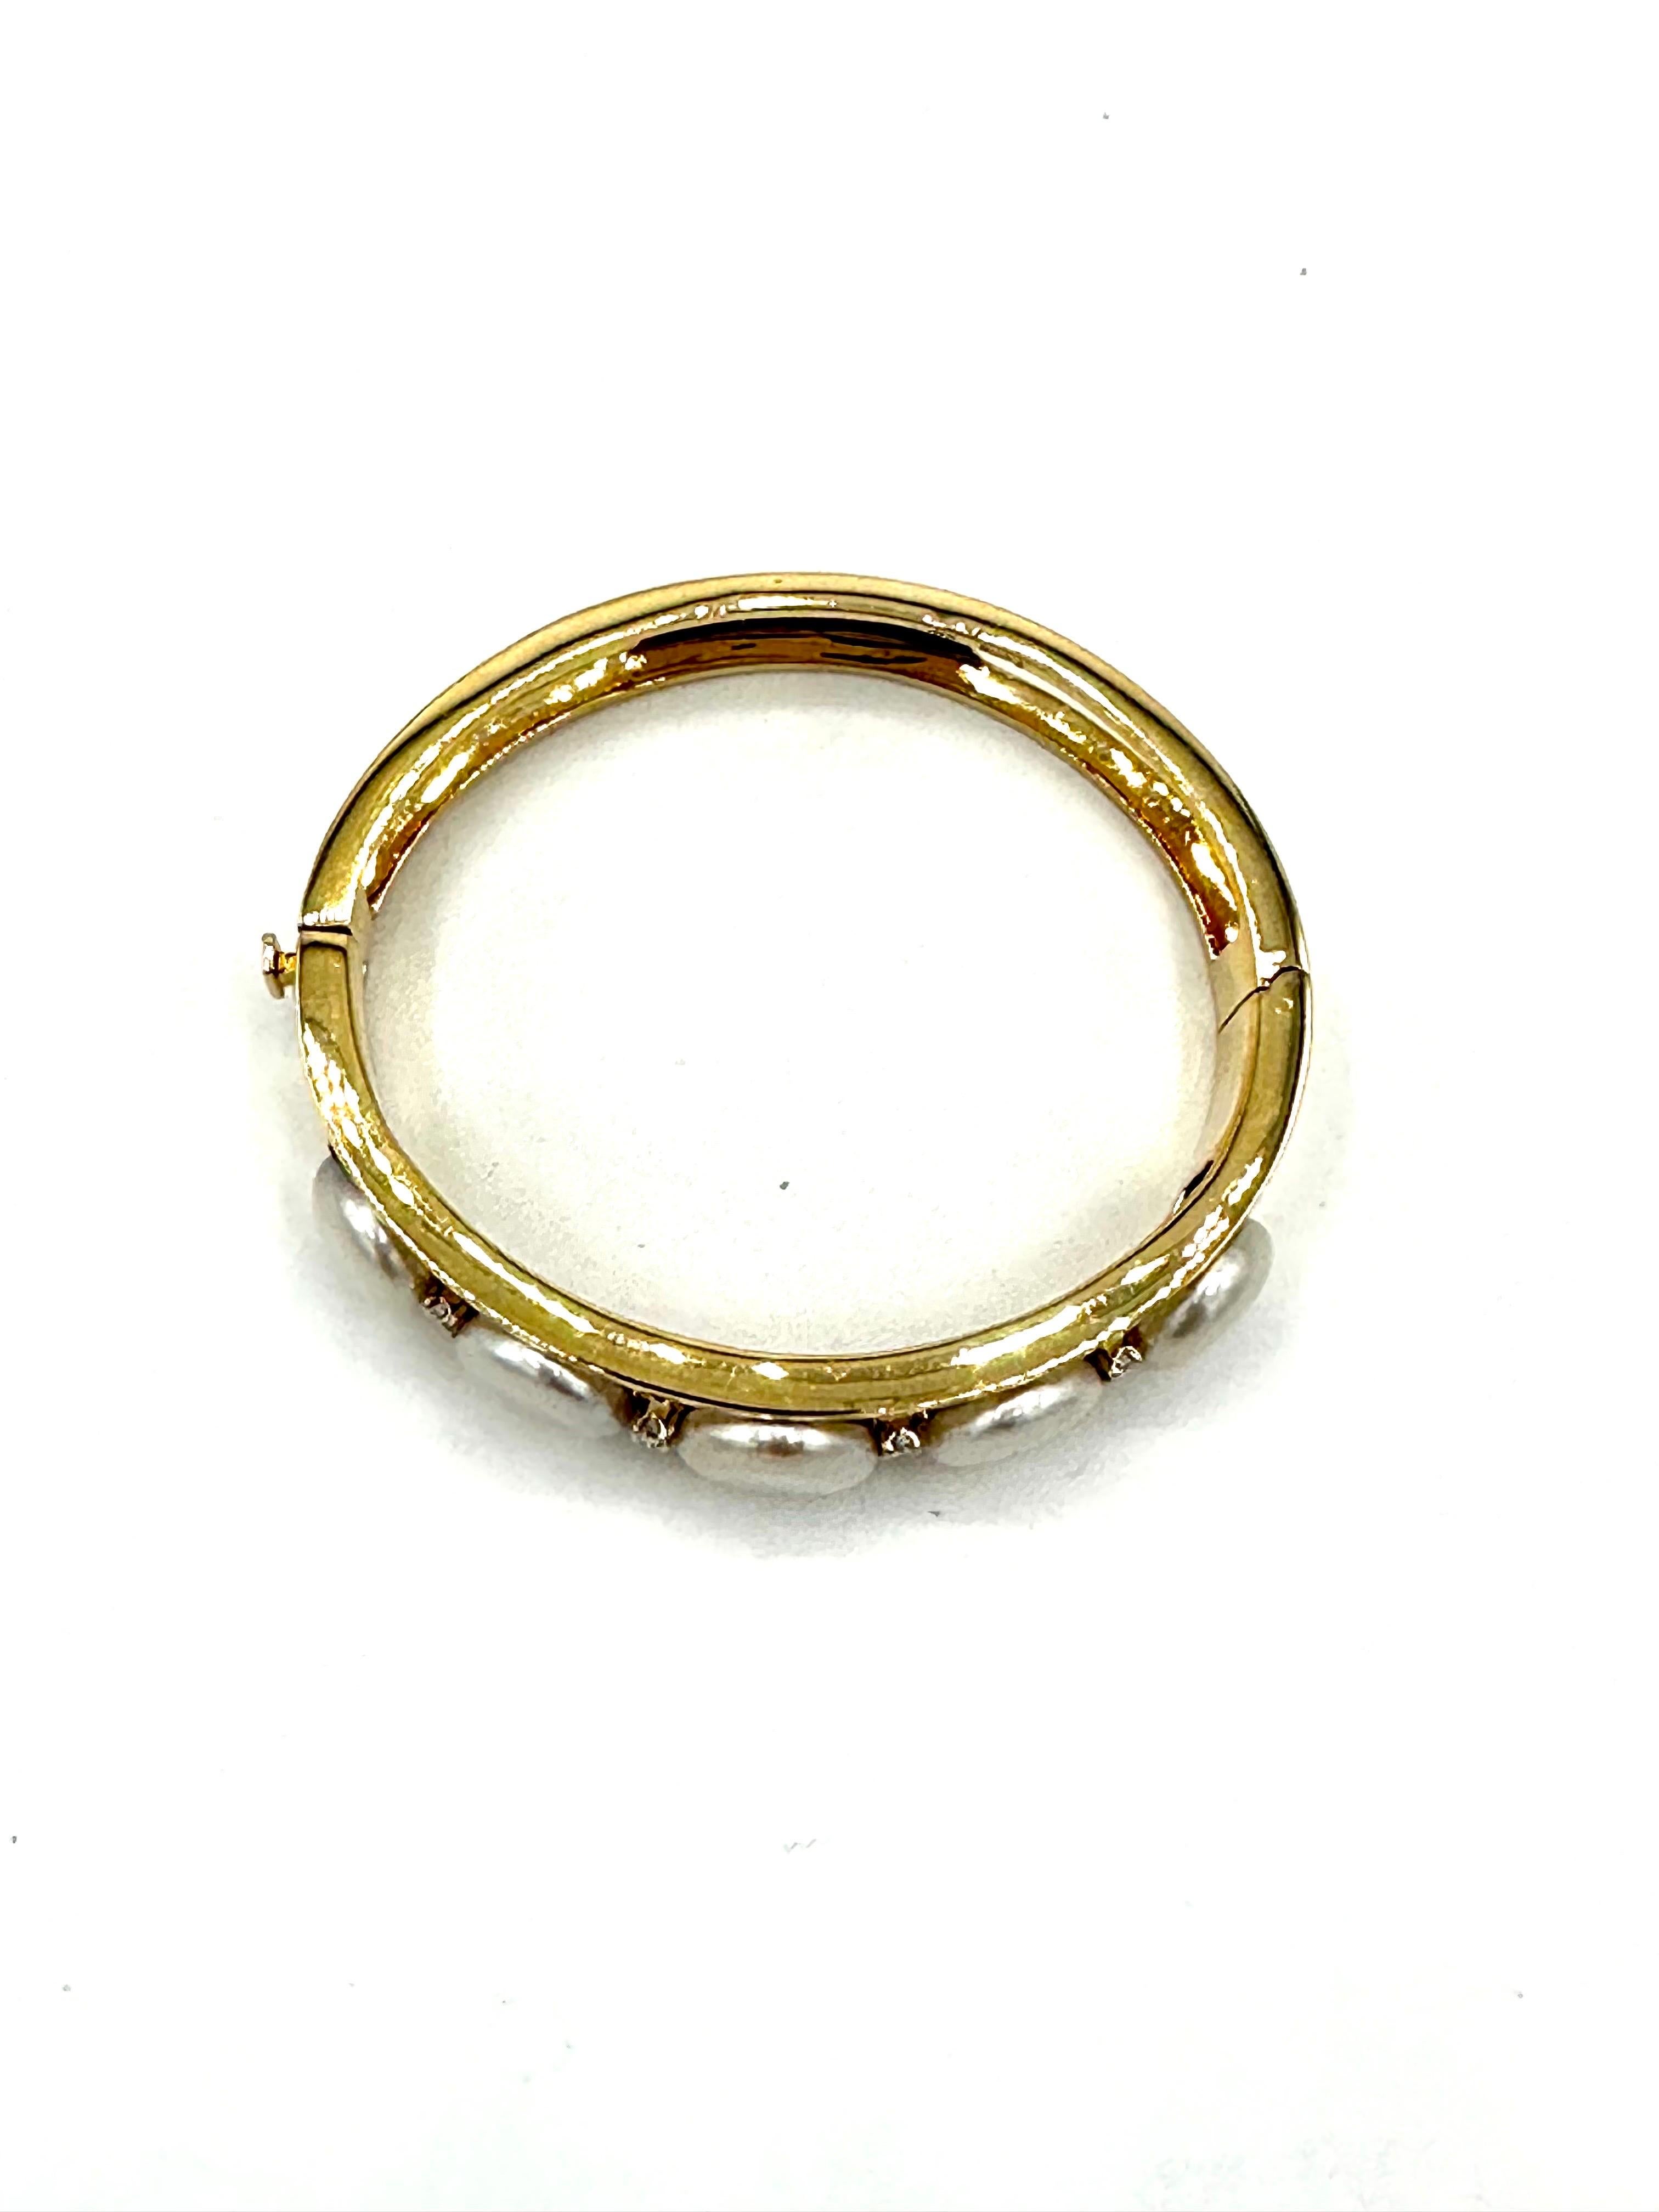 Modern Gumps Round Brilliant Diamond and Coin Pearl 18k Yellow Gold Bangle Bracelet